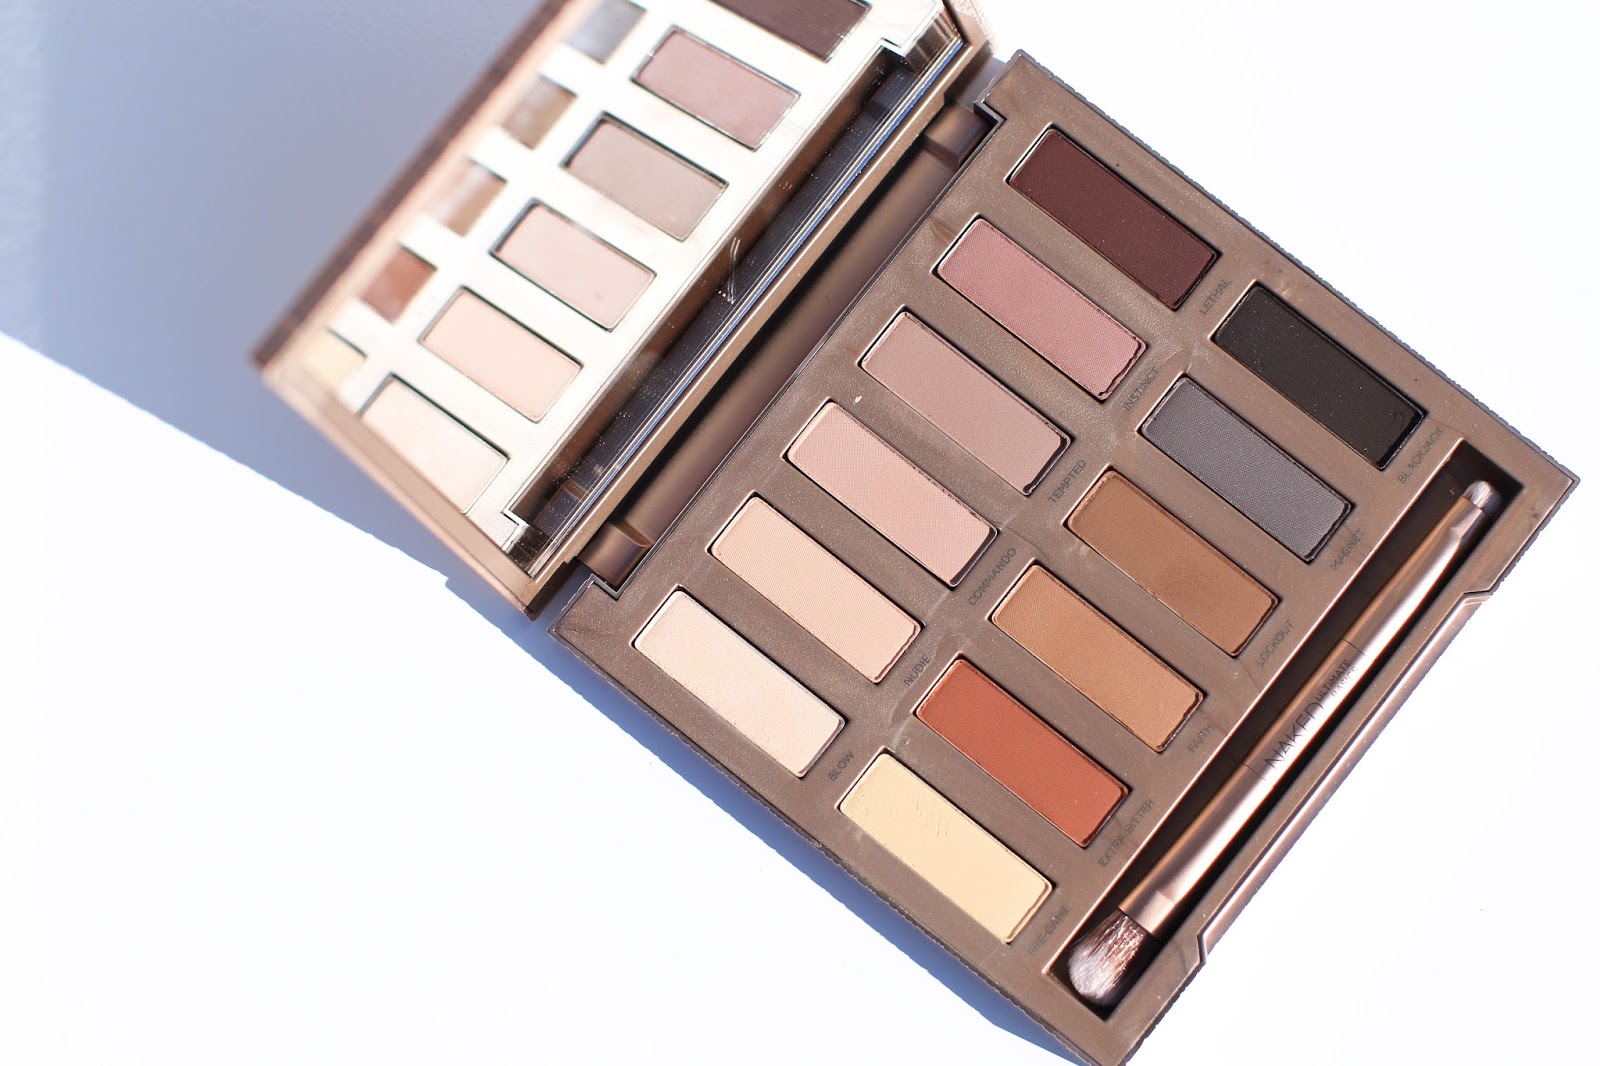 New Urban Decay Ultimate Naked Basics Palette For Sale In Fairview, Dublin